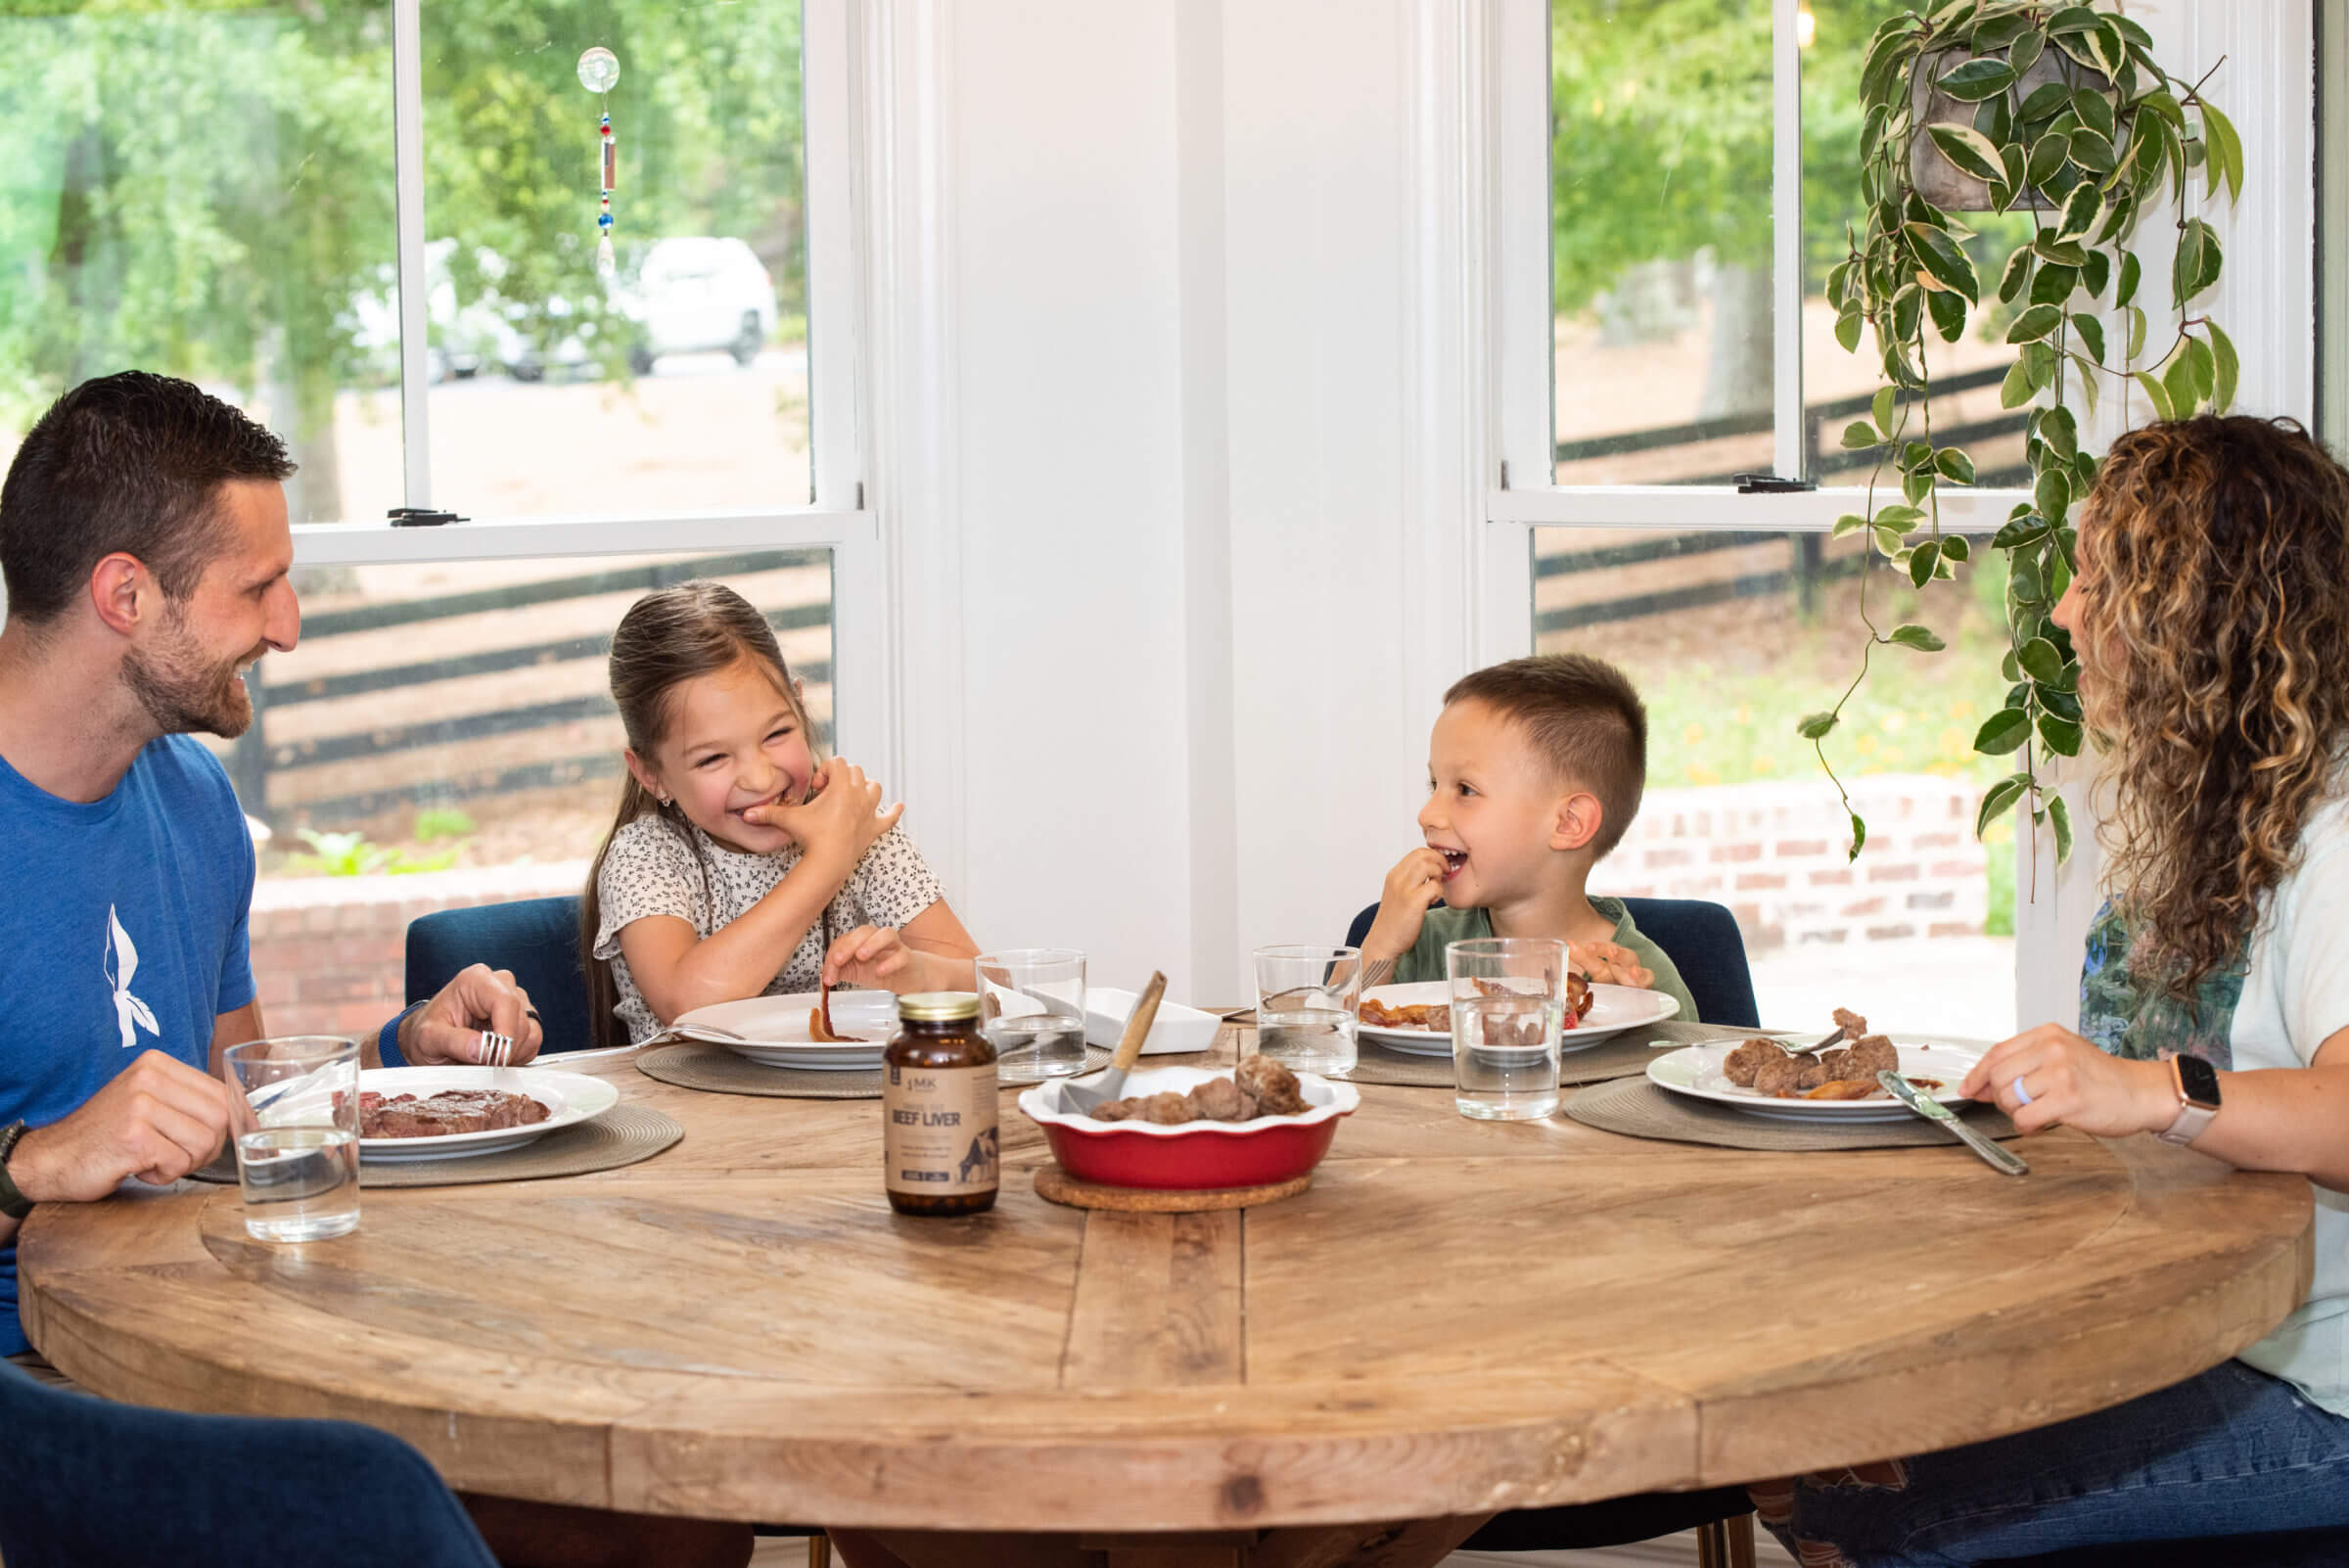 A photo of the Kummer family sitting around the table eating dinner.